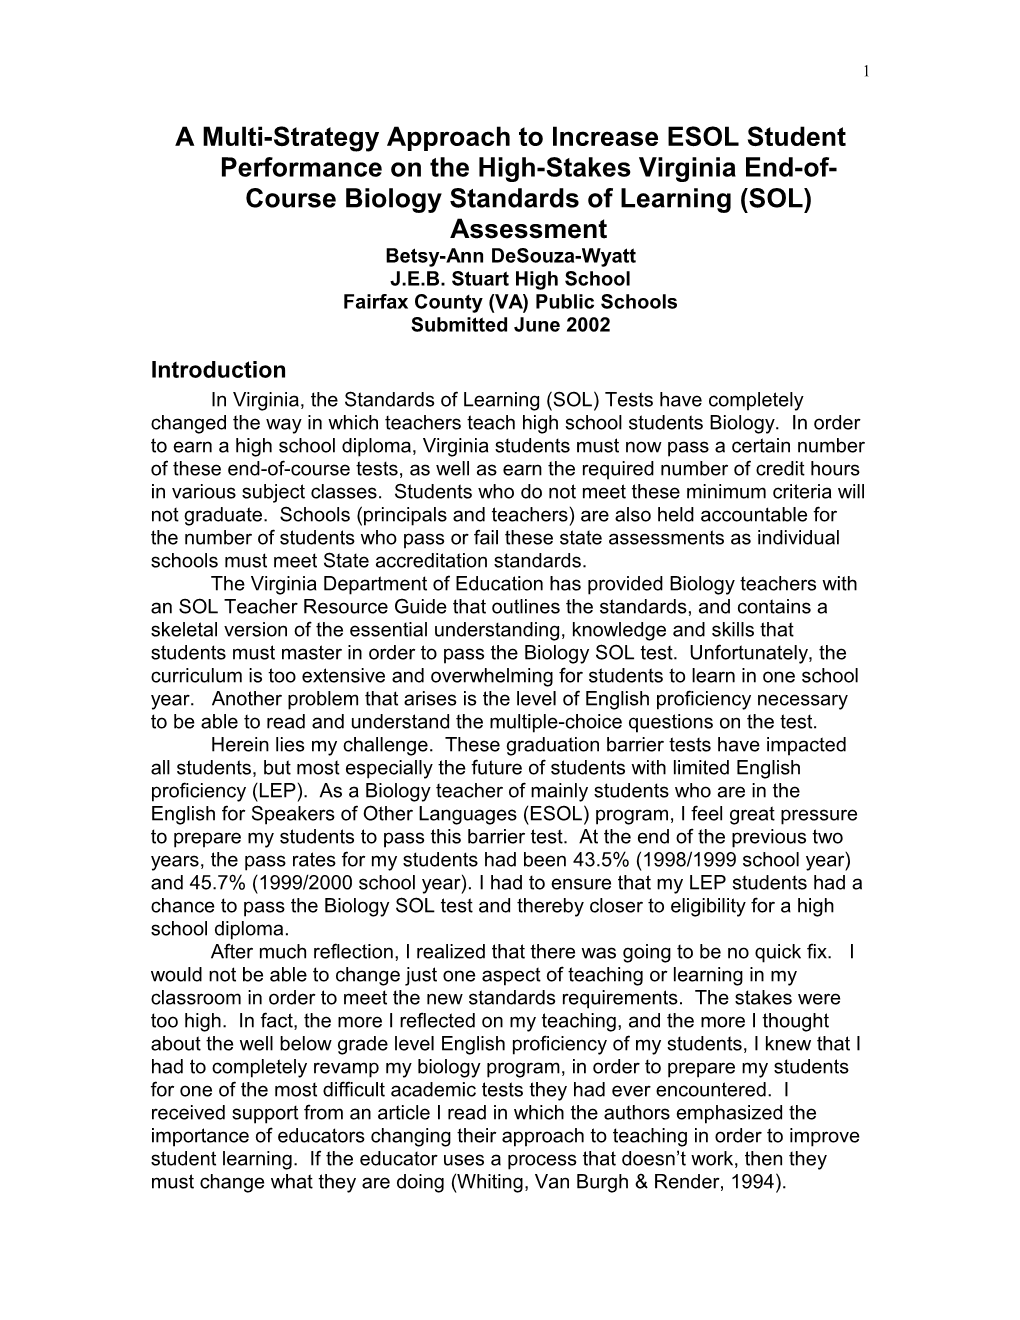 A Multi-Strategy Approach To Increase ESOL Student Performance On The High-Stakes Virginia End-Of-Course Biology Standards Of